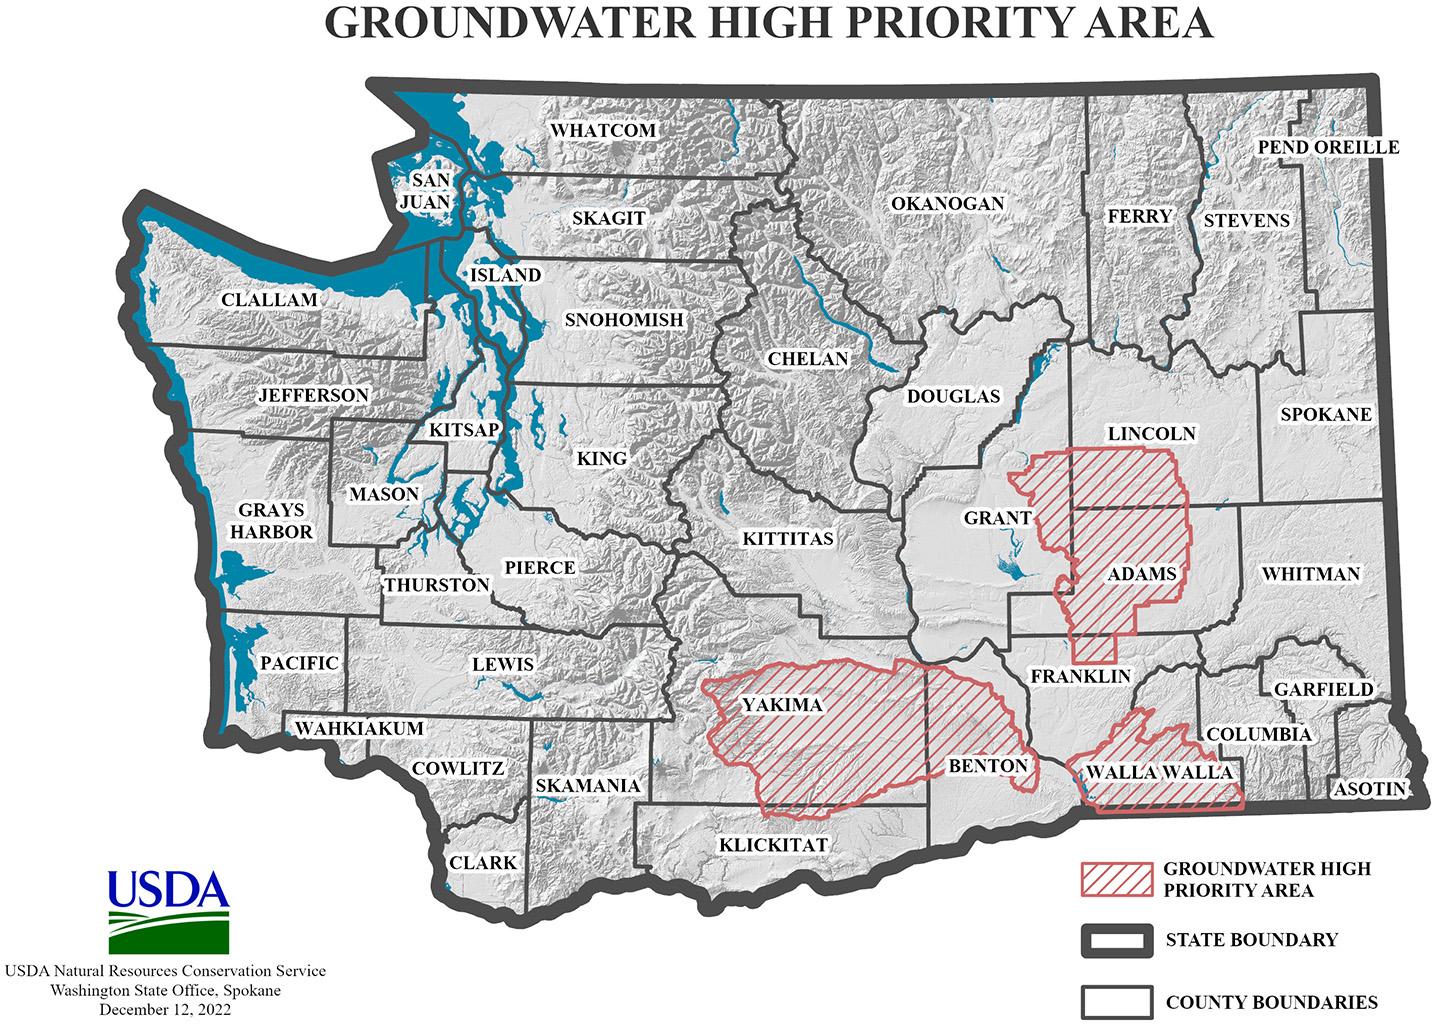 CIC Groundwater High Priority Area